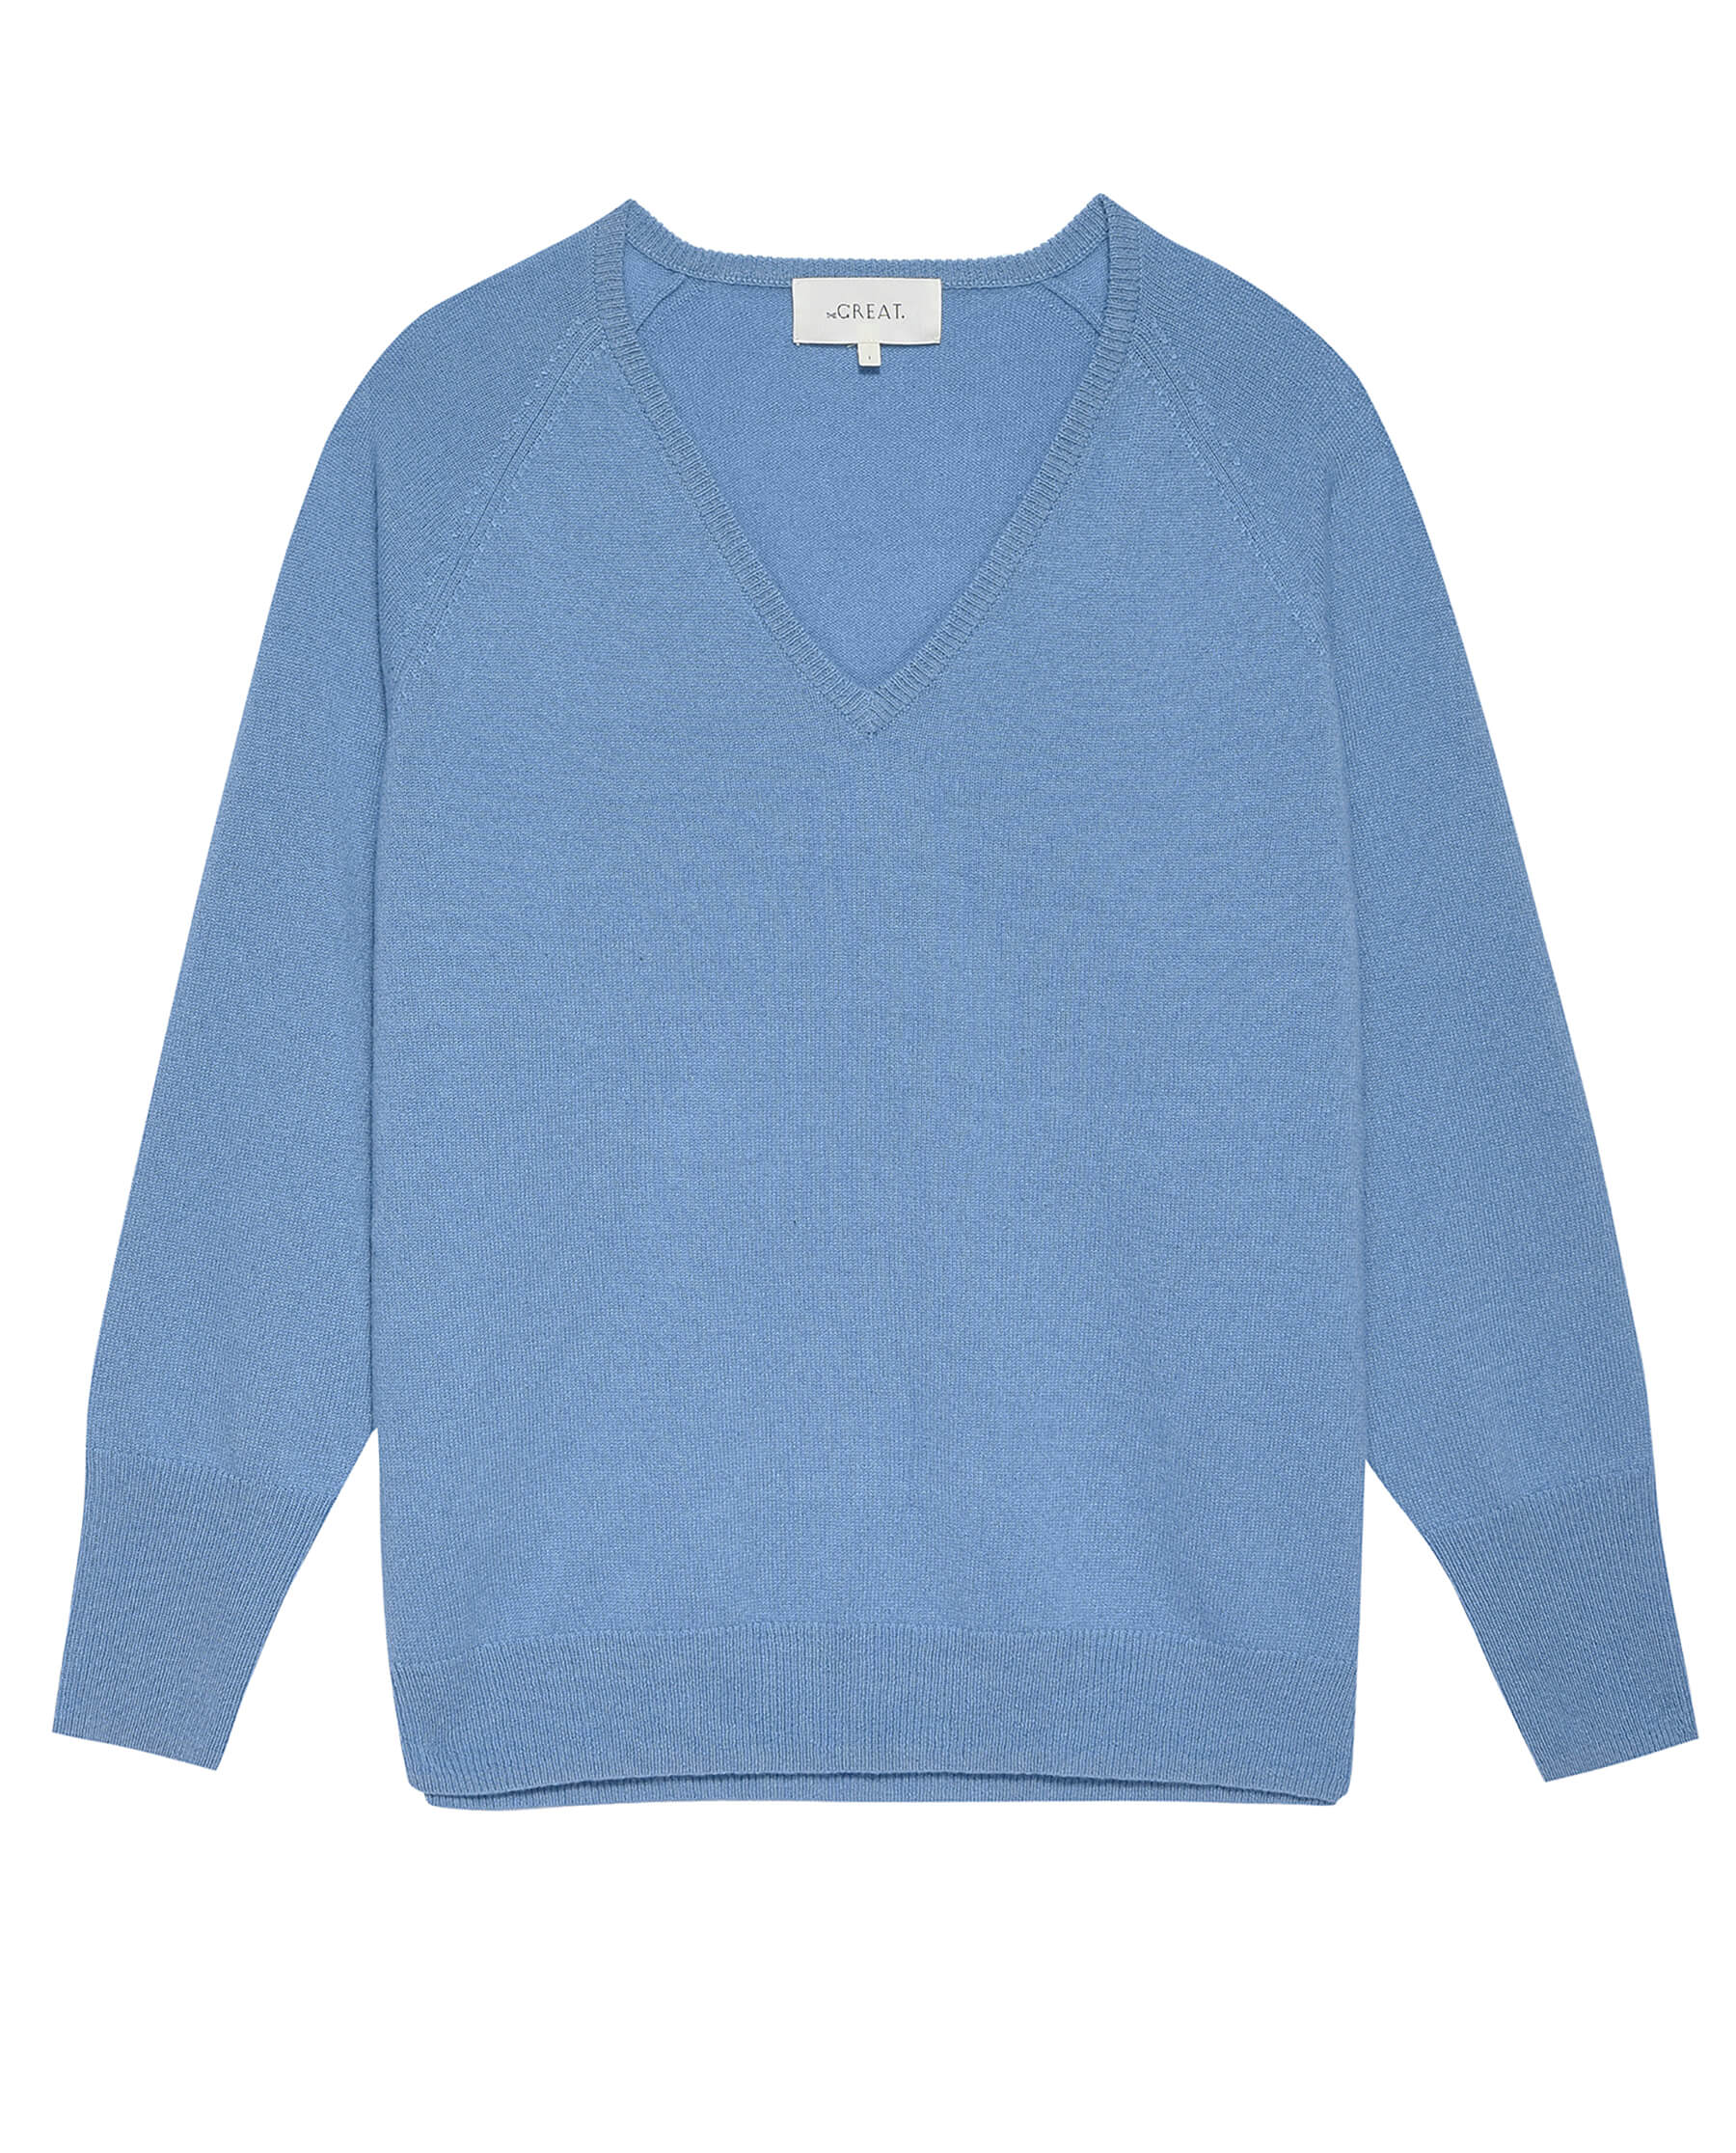 The Slouchy V-Neck Pullover. -- Icicle SWEATERS THE GREAT. HOL 23 CASHMERE SALE